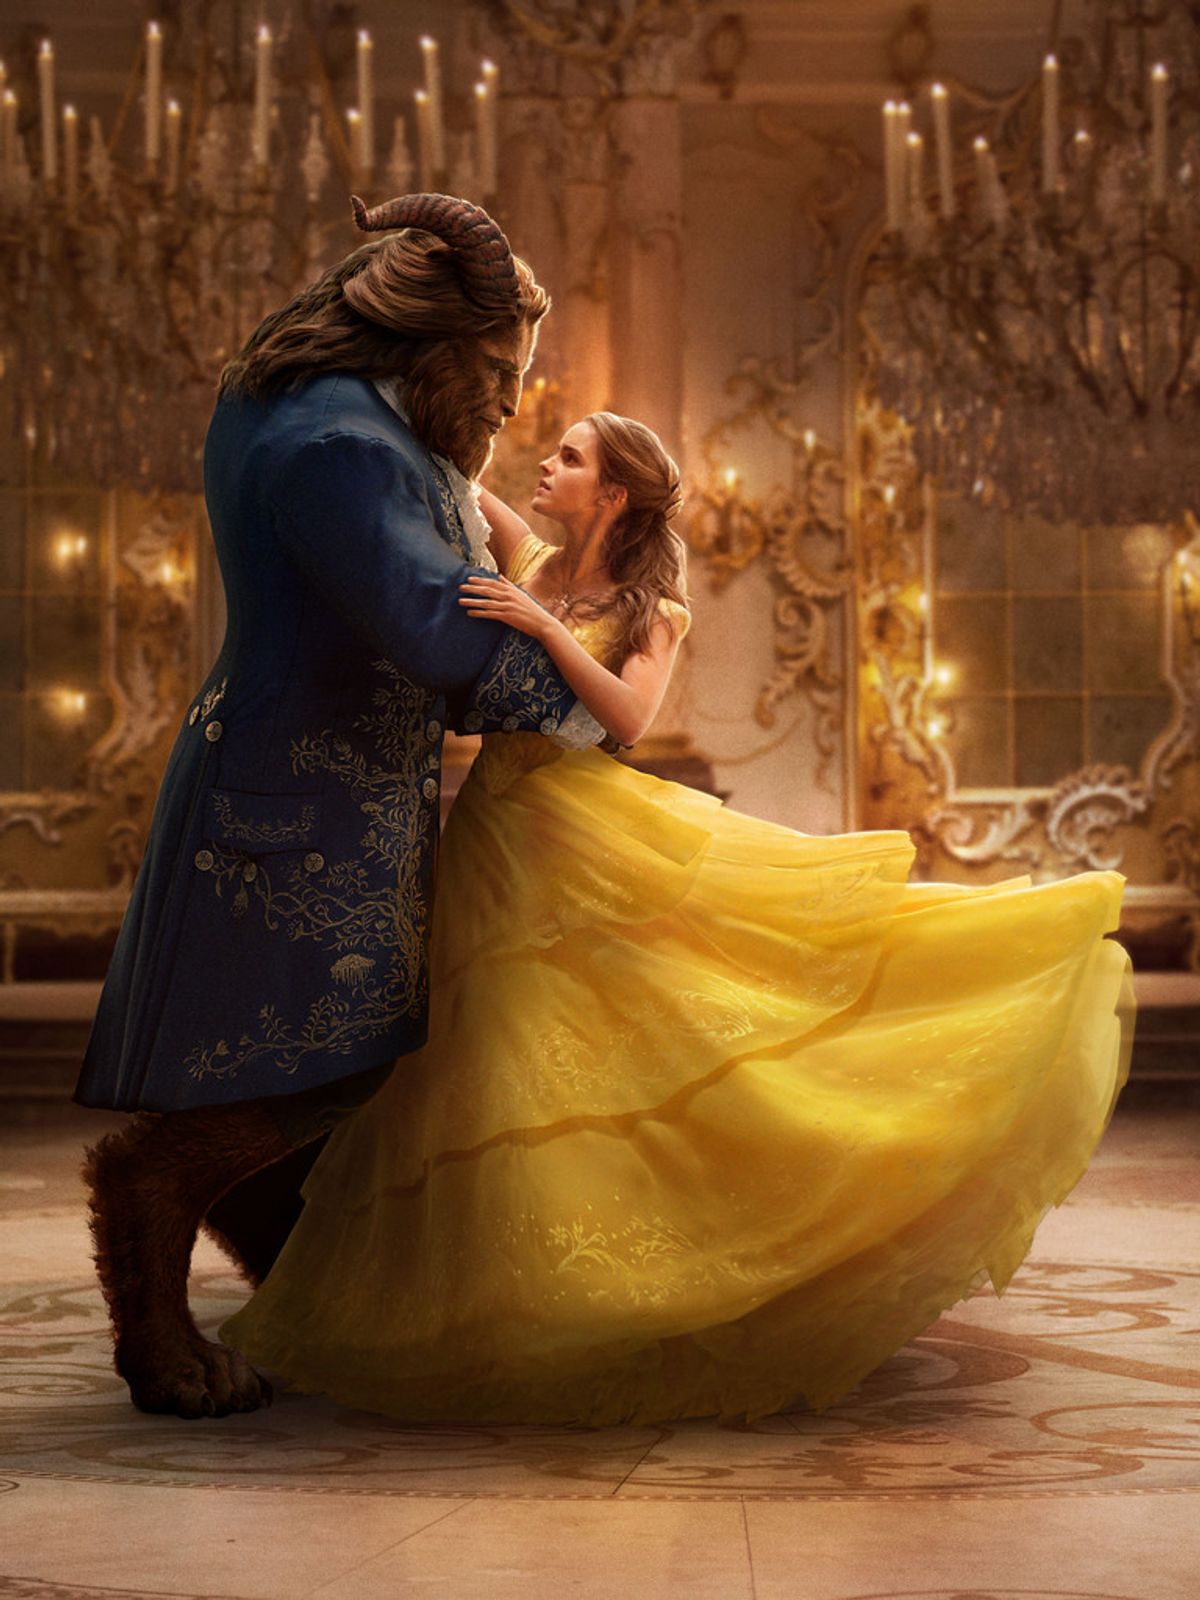 The New Beauty And The Beast Songs That Will Be Stuck In Your Head For Days